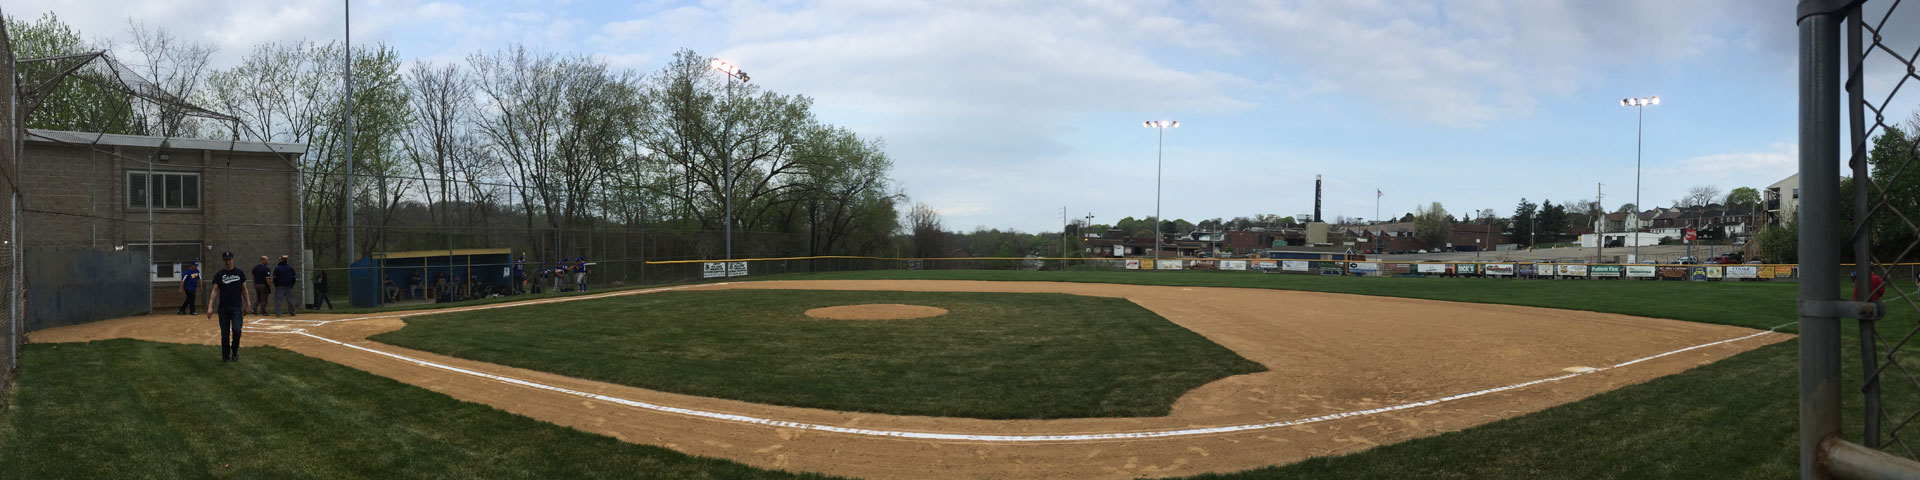 A baseball field in early spring.